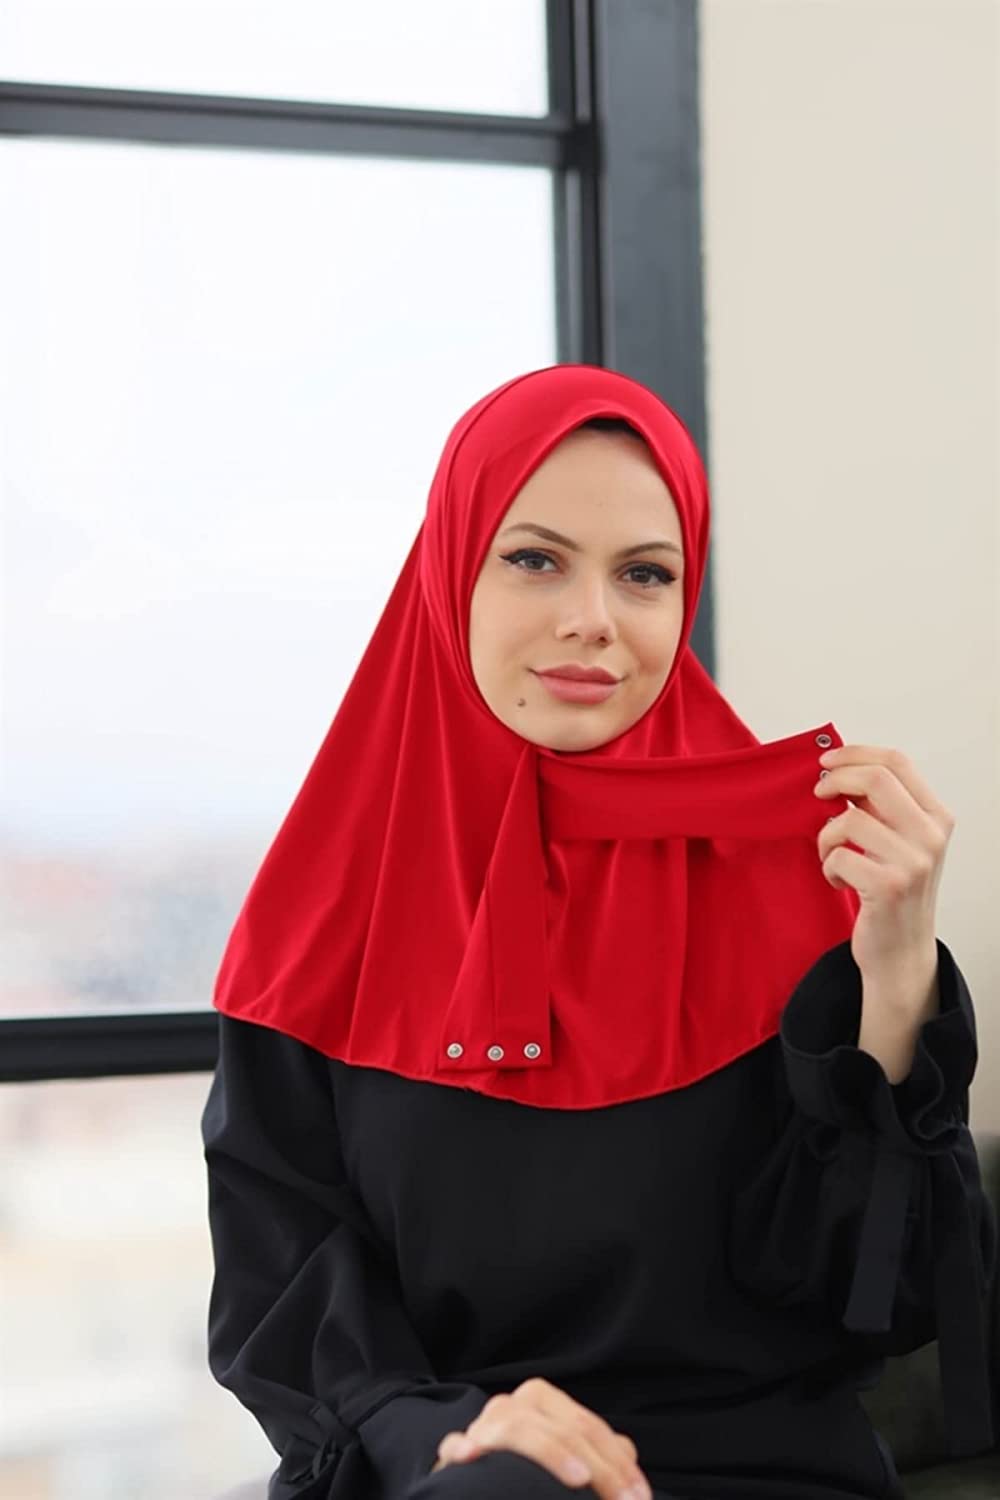 Marwa Fashion Muslim Hijab for Women - Premium Quality Hijab Scarves for Women Made up Polyester - Sweat Absorbent and can be Used on Every Occasion Red